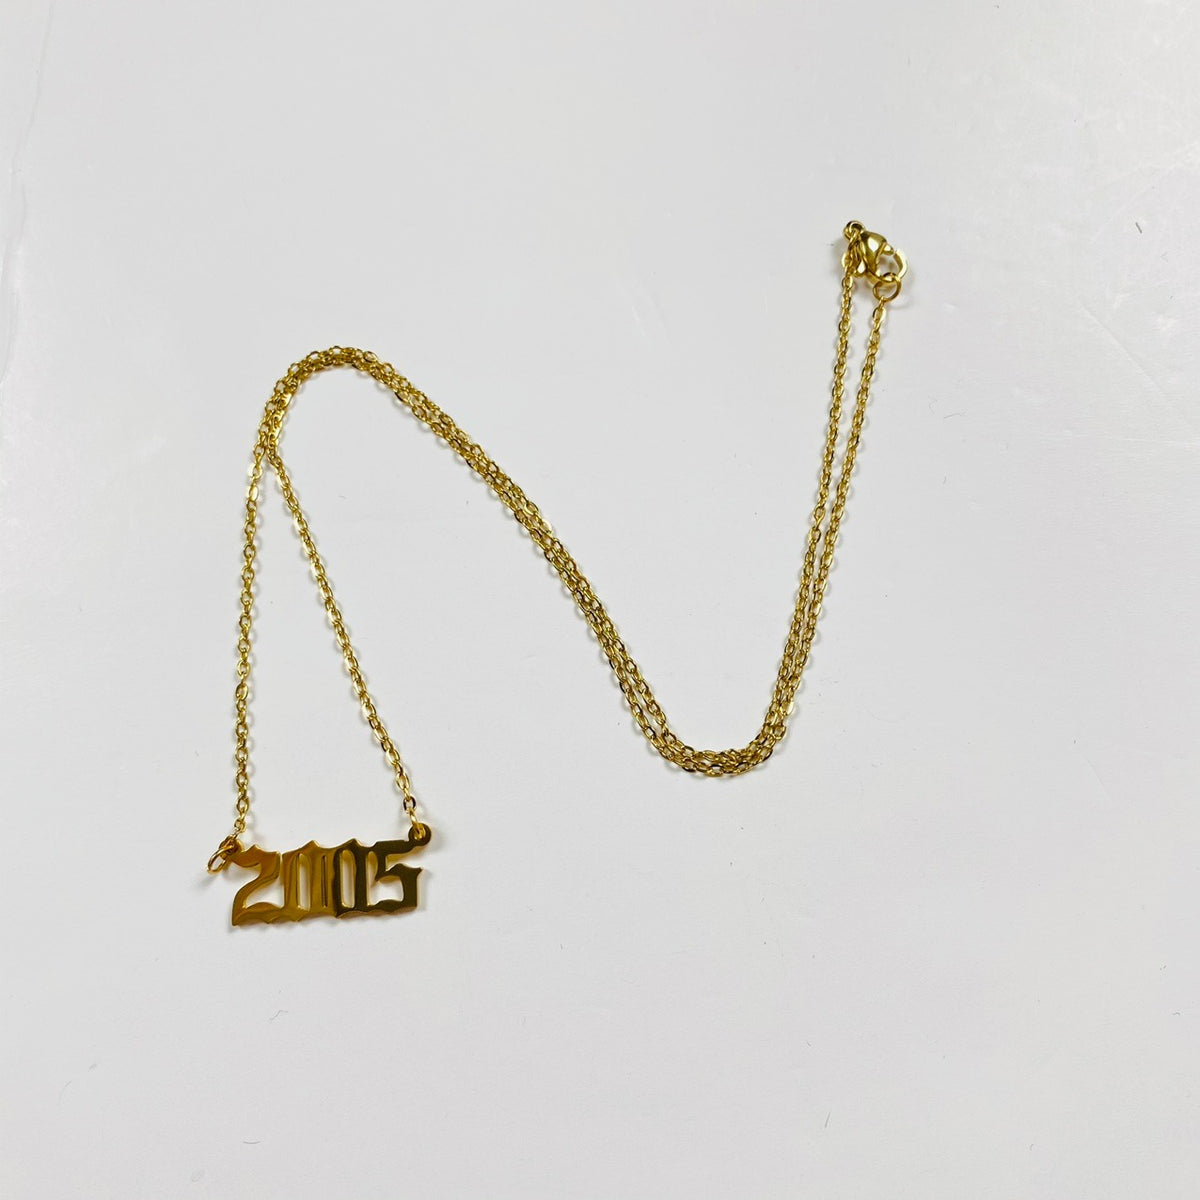 2000 Birth Year Necklace Chain Gold – Clout Closet